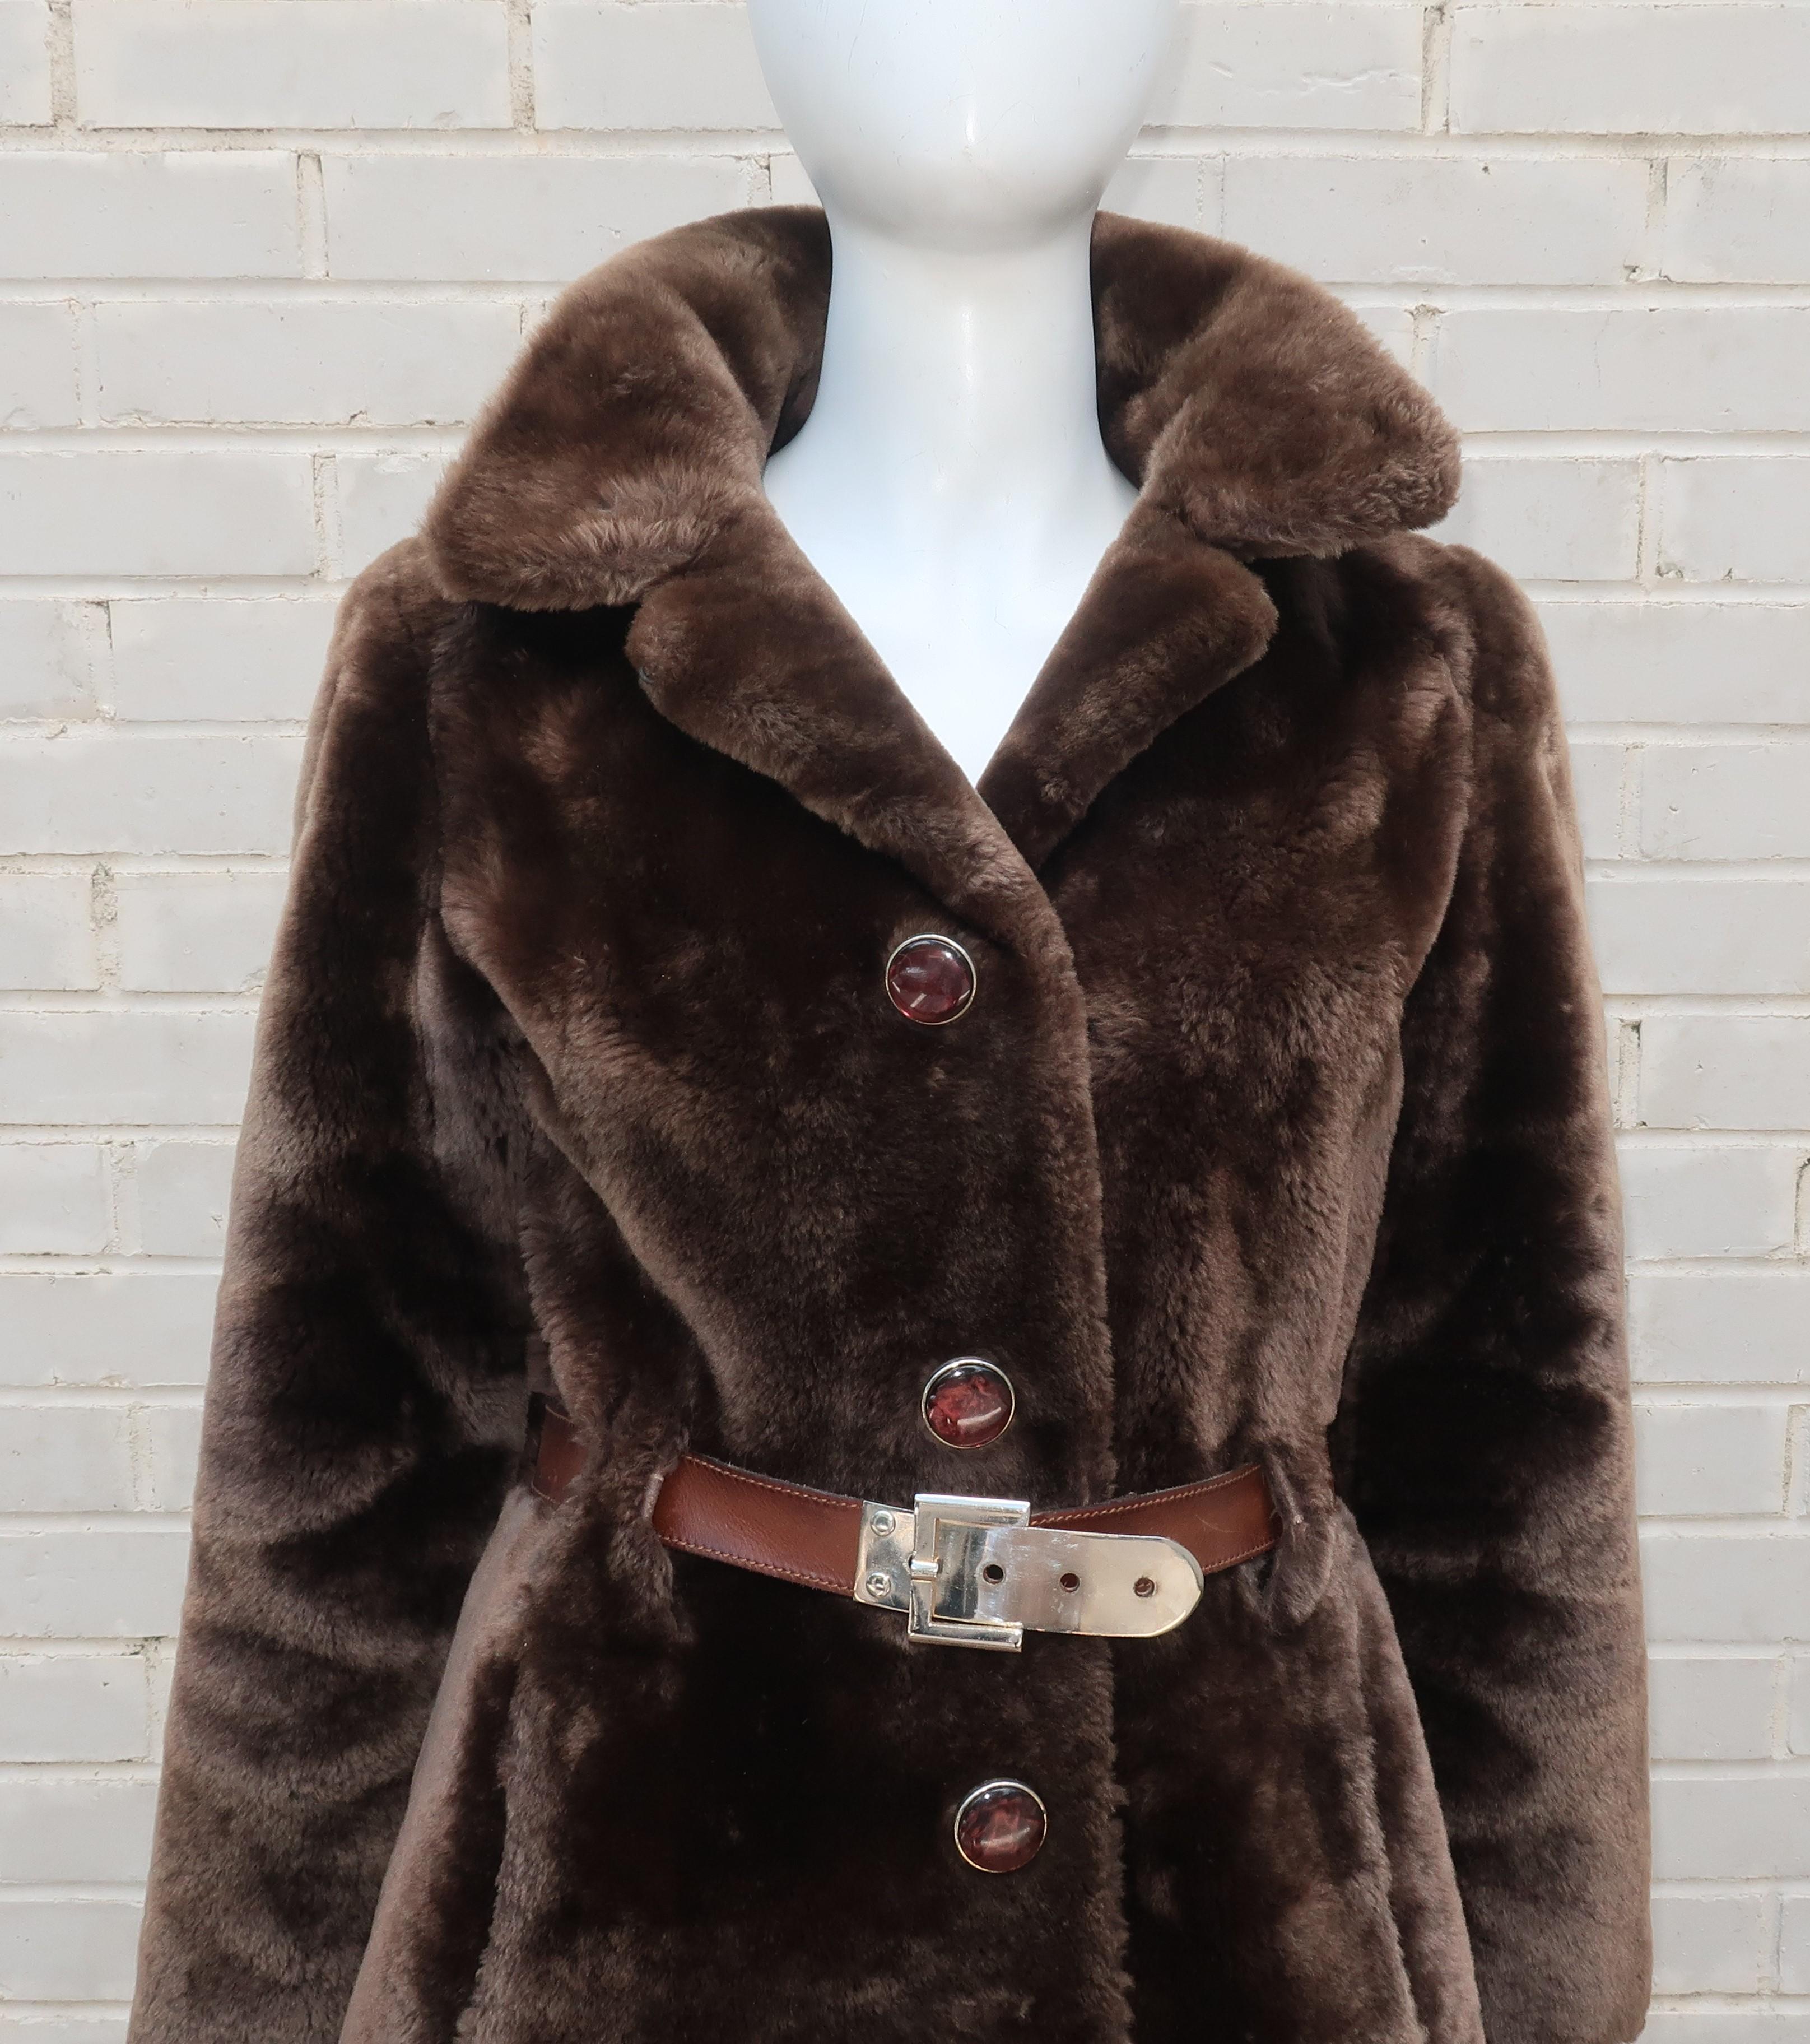 Revillon furriers has been providing luxury goods from Paris since the 1700's.  This brown mouton coat not only offers a practical topper for cold winters but also the stylish mod aesthetic of the 1960's.  The coat features decorative marbleized